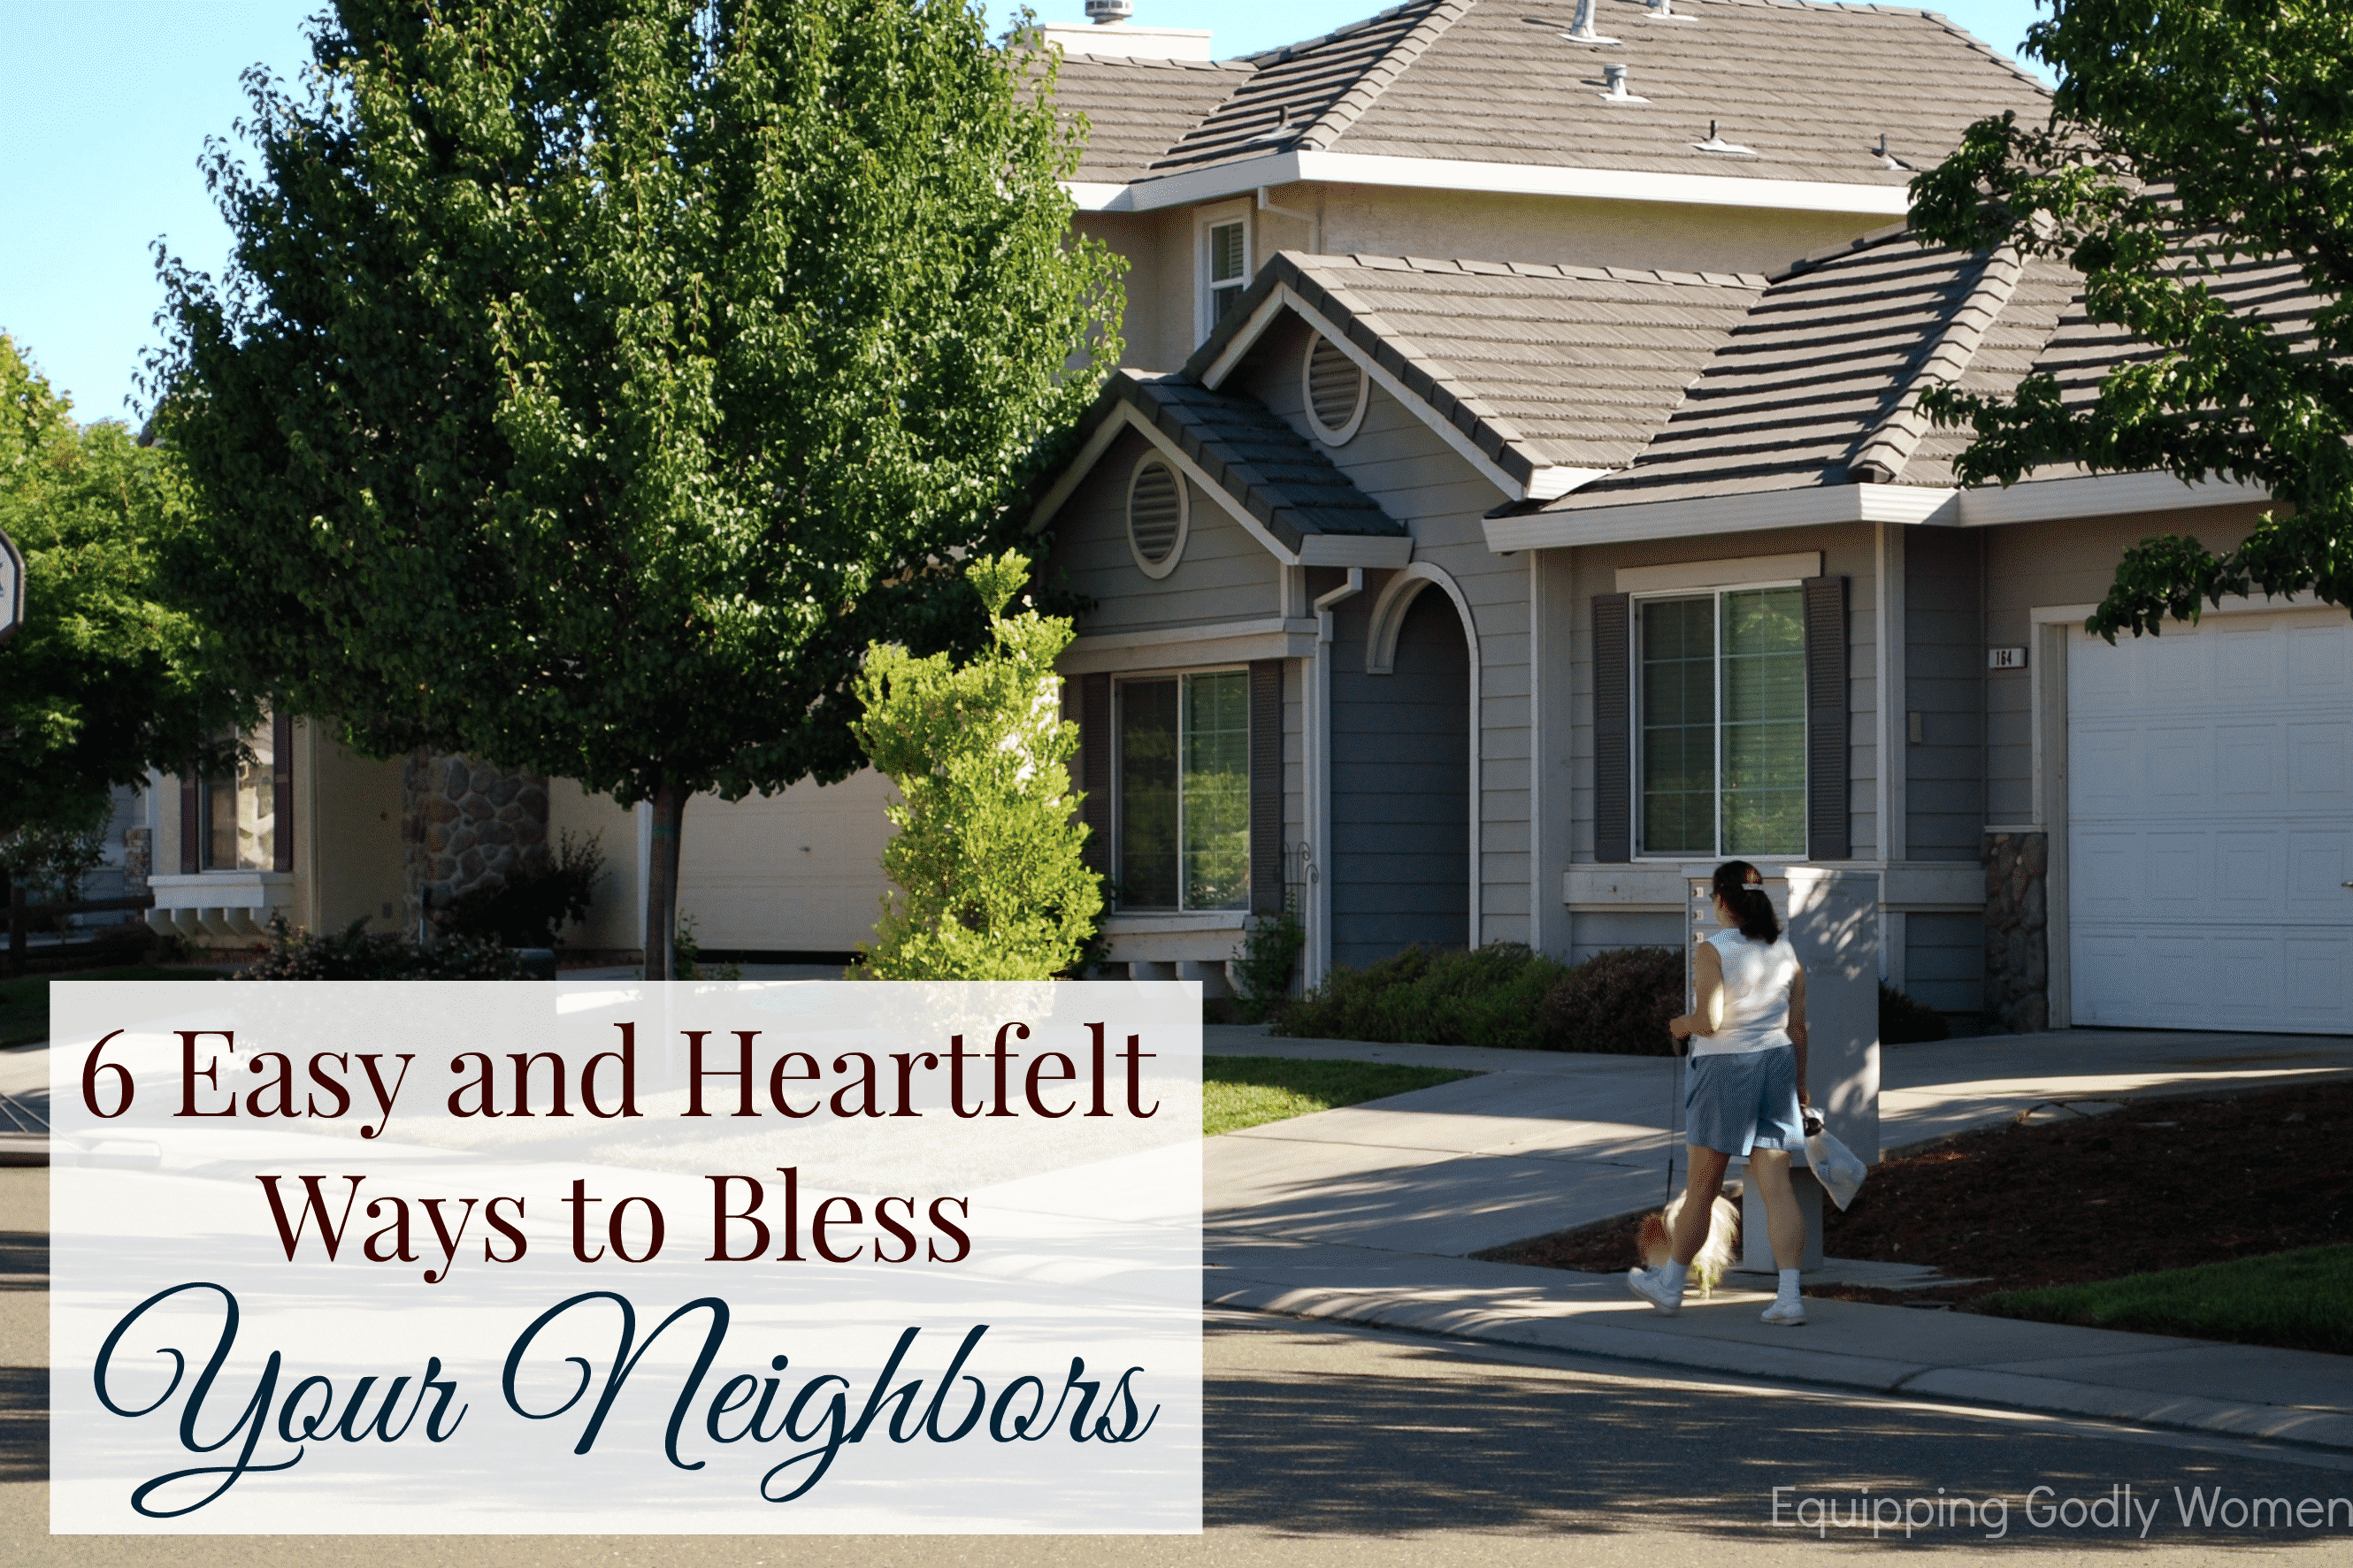 6 Easy and Heartfelt Ways to Bless Your Neighbors